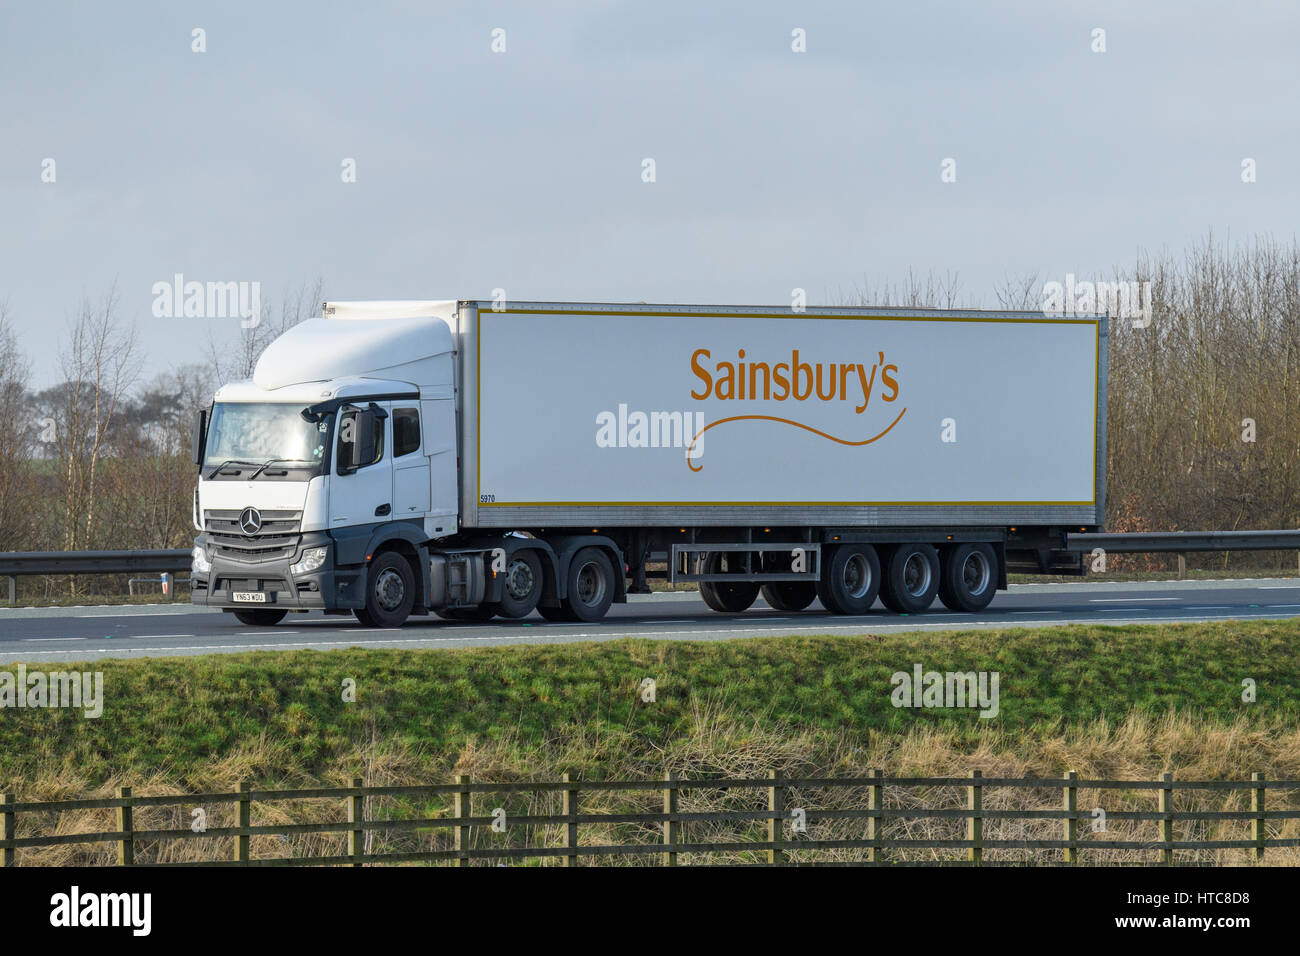 Distribution & transportation - an articulated lorry, heavy goods vehicle (HGV) with Sainsbury's logo travelling on the A1 motorway - England, GB, UK. Stock Photo